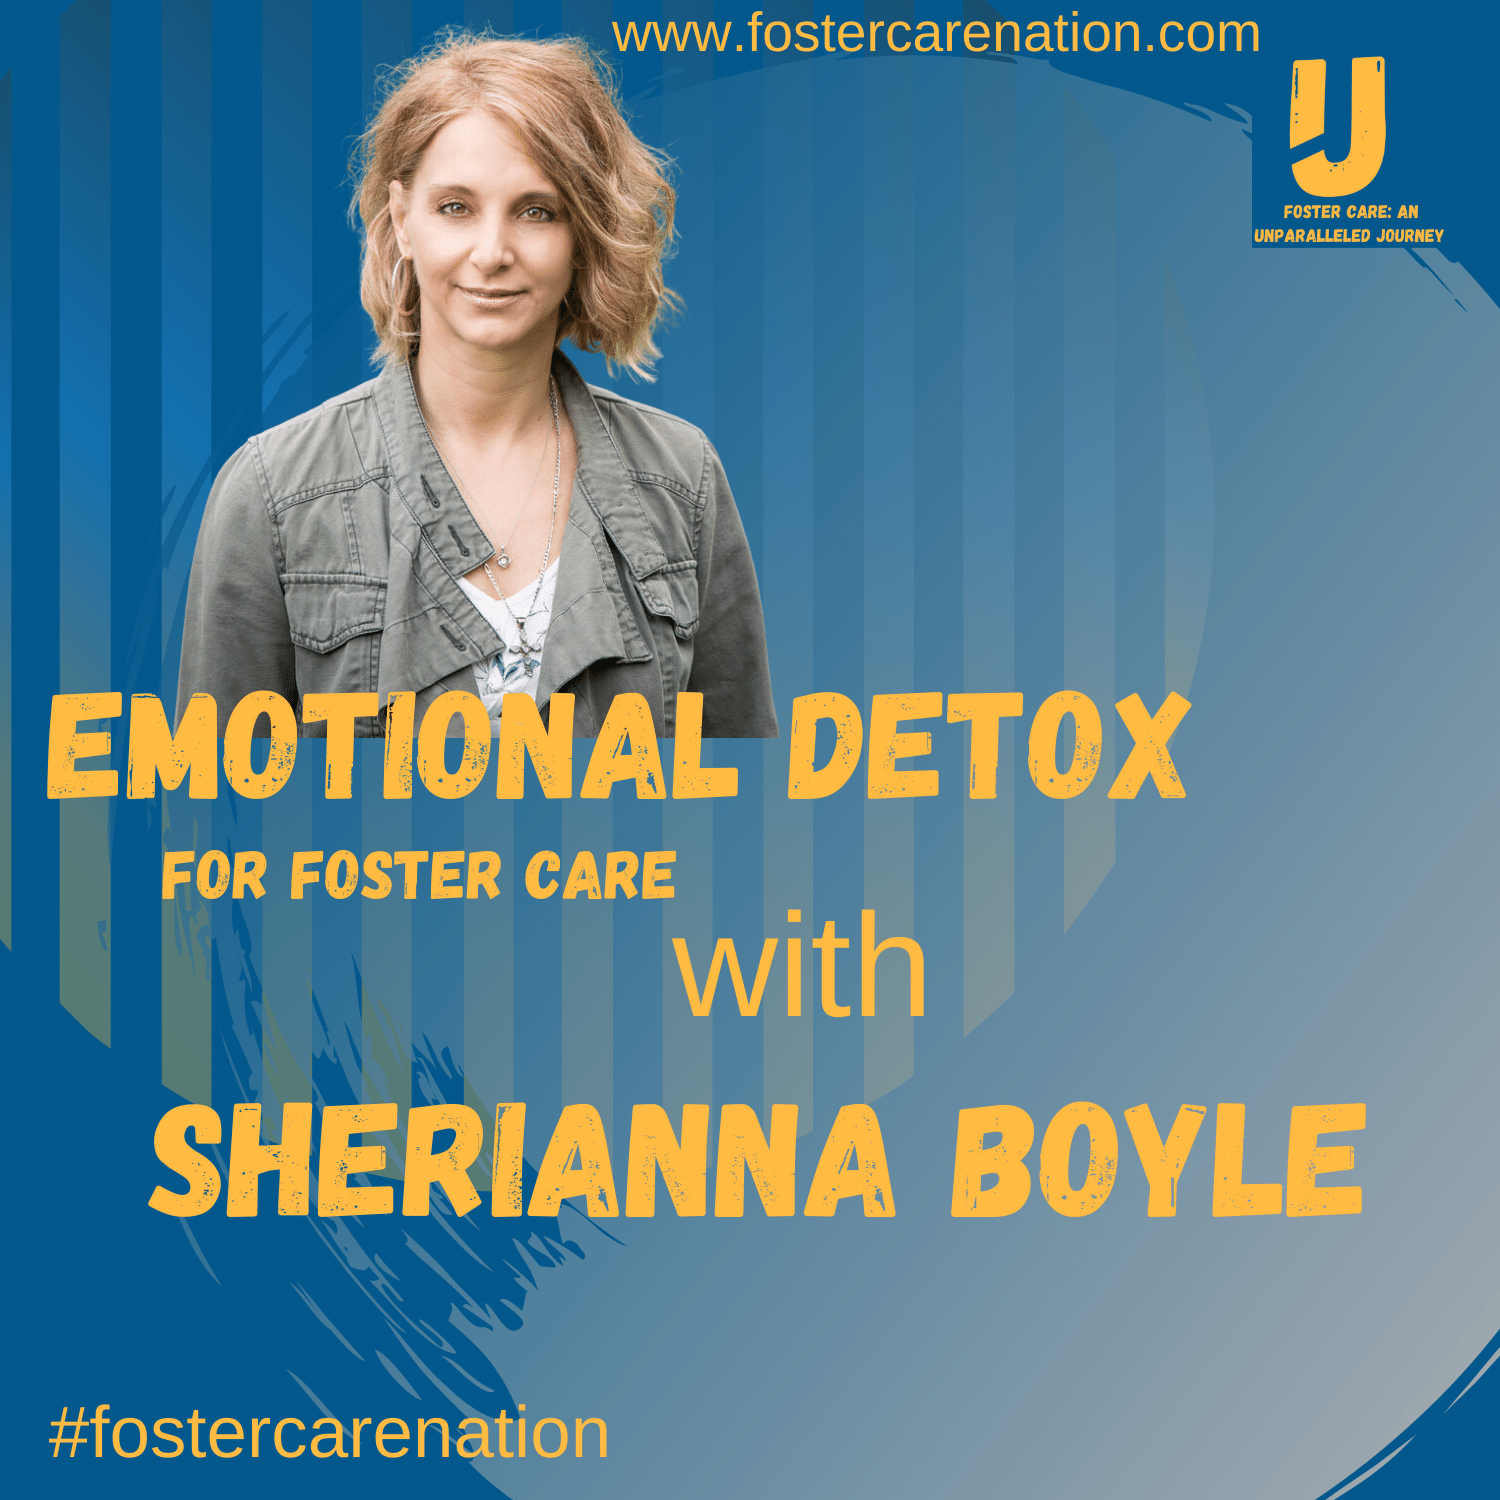 Emotional Detox for Foster Care with Sherianna Boyle